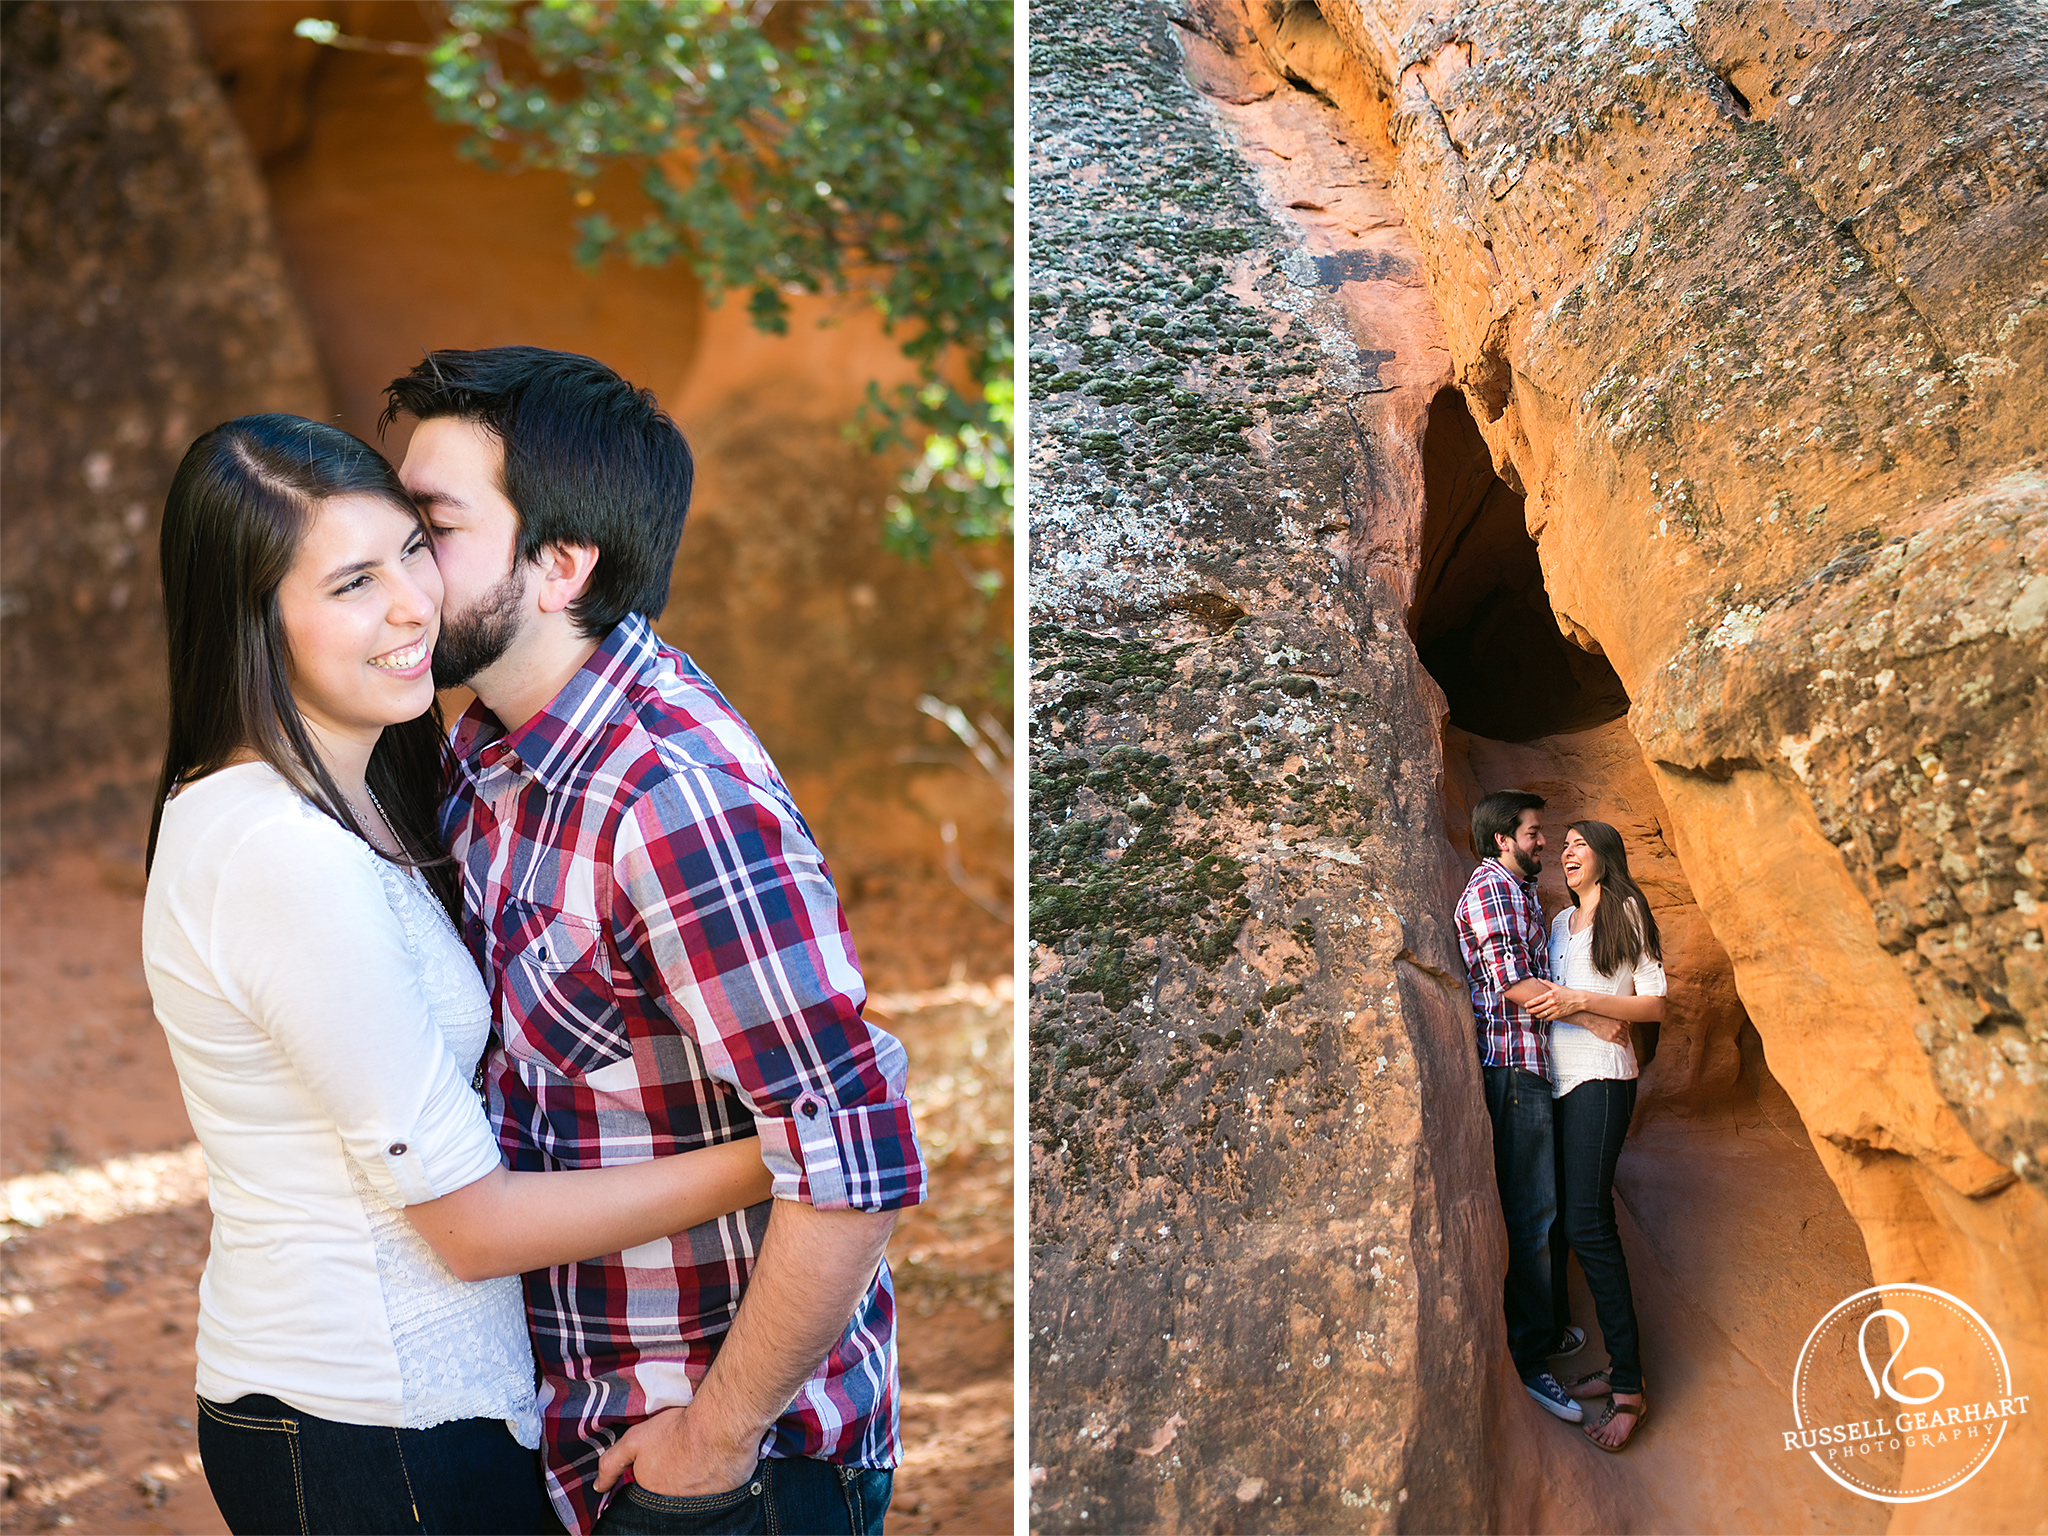 Snow Canyon Engagement Portrait - St. George Engagement Photographer - Russell Gearhart Photography - www.gearhartphoto.com